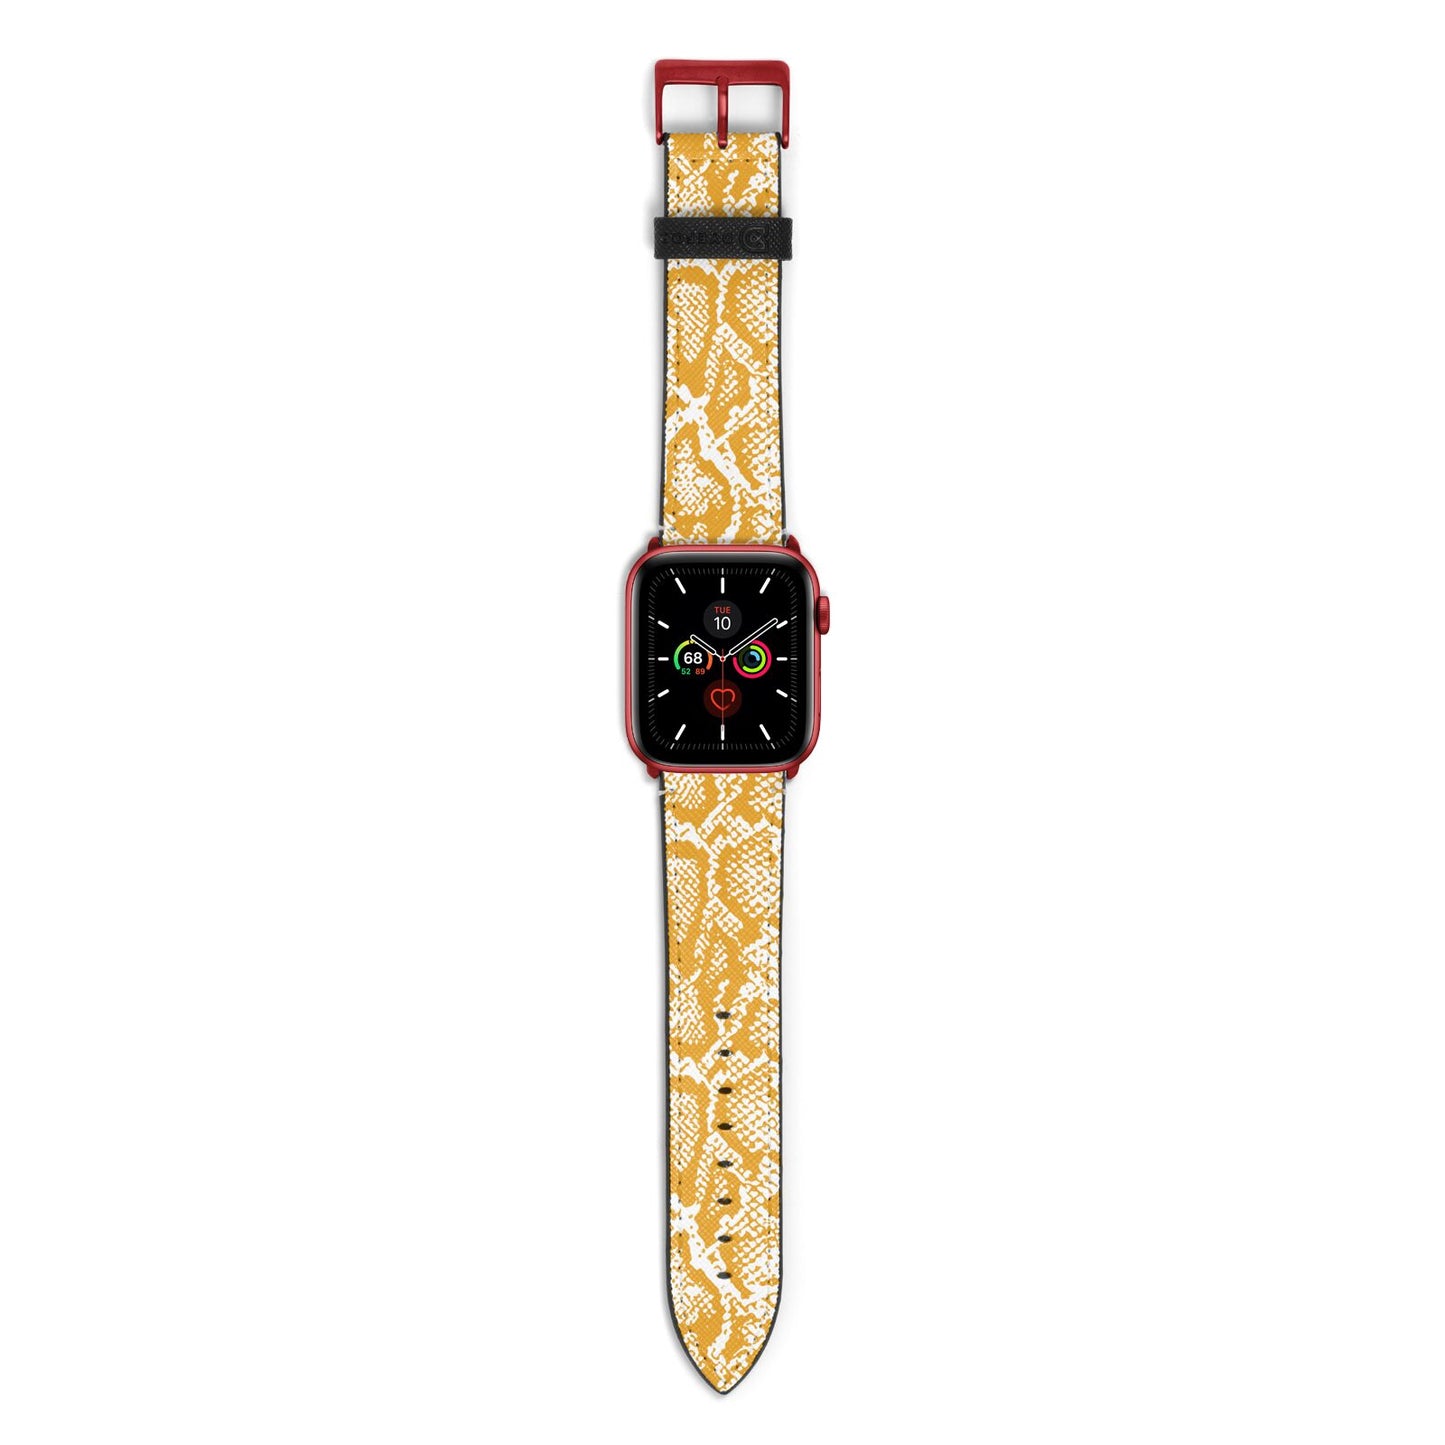 Yellow Snakeskin Apple Watch Strap with Red Hardware